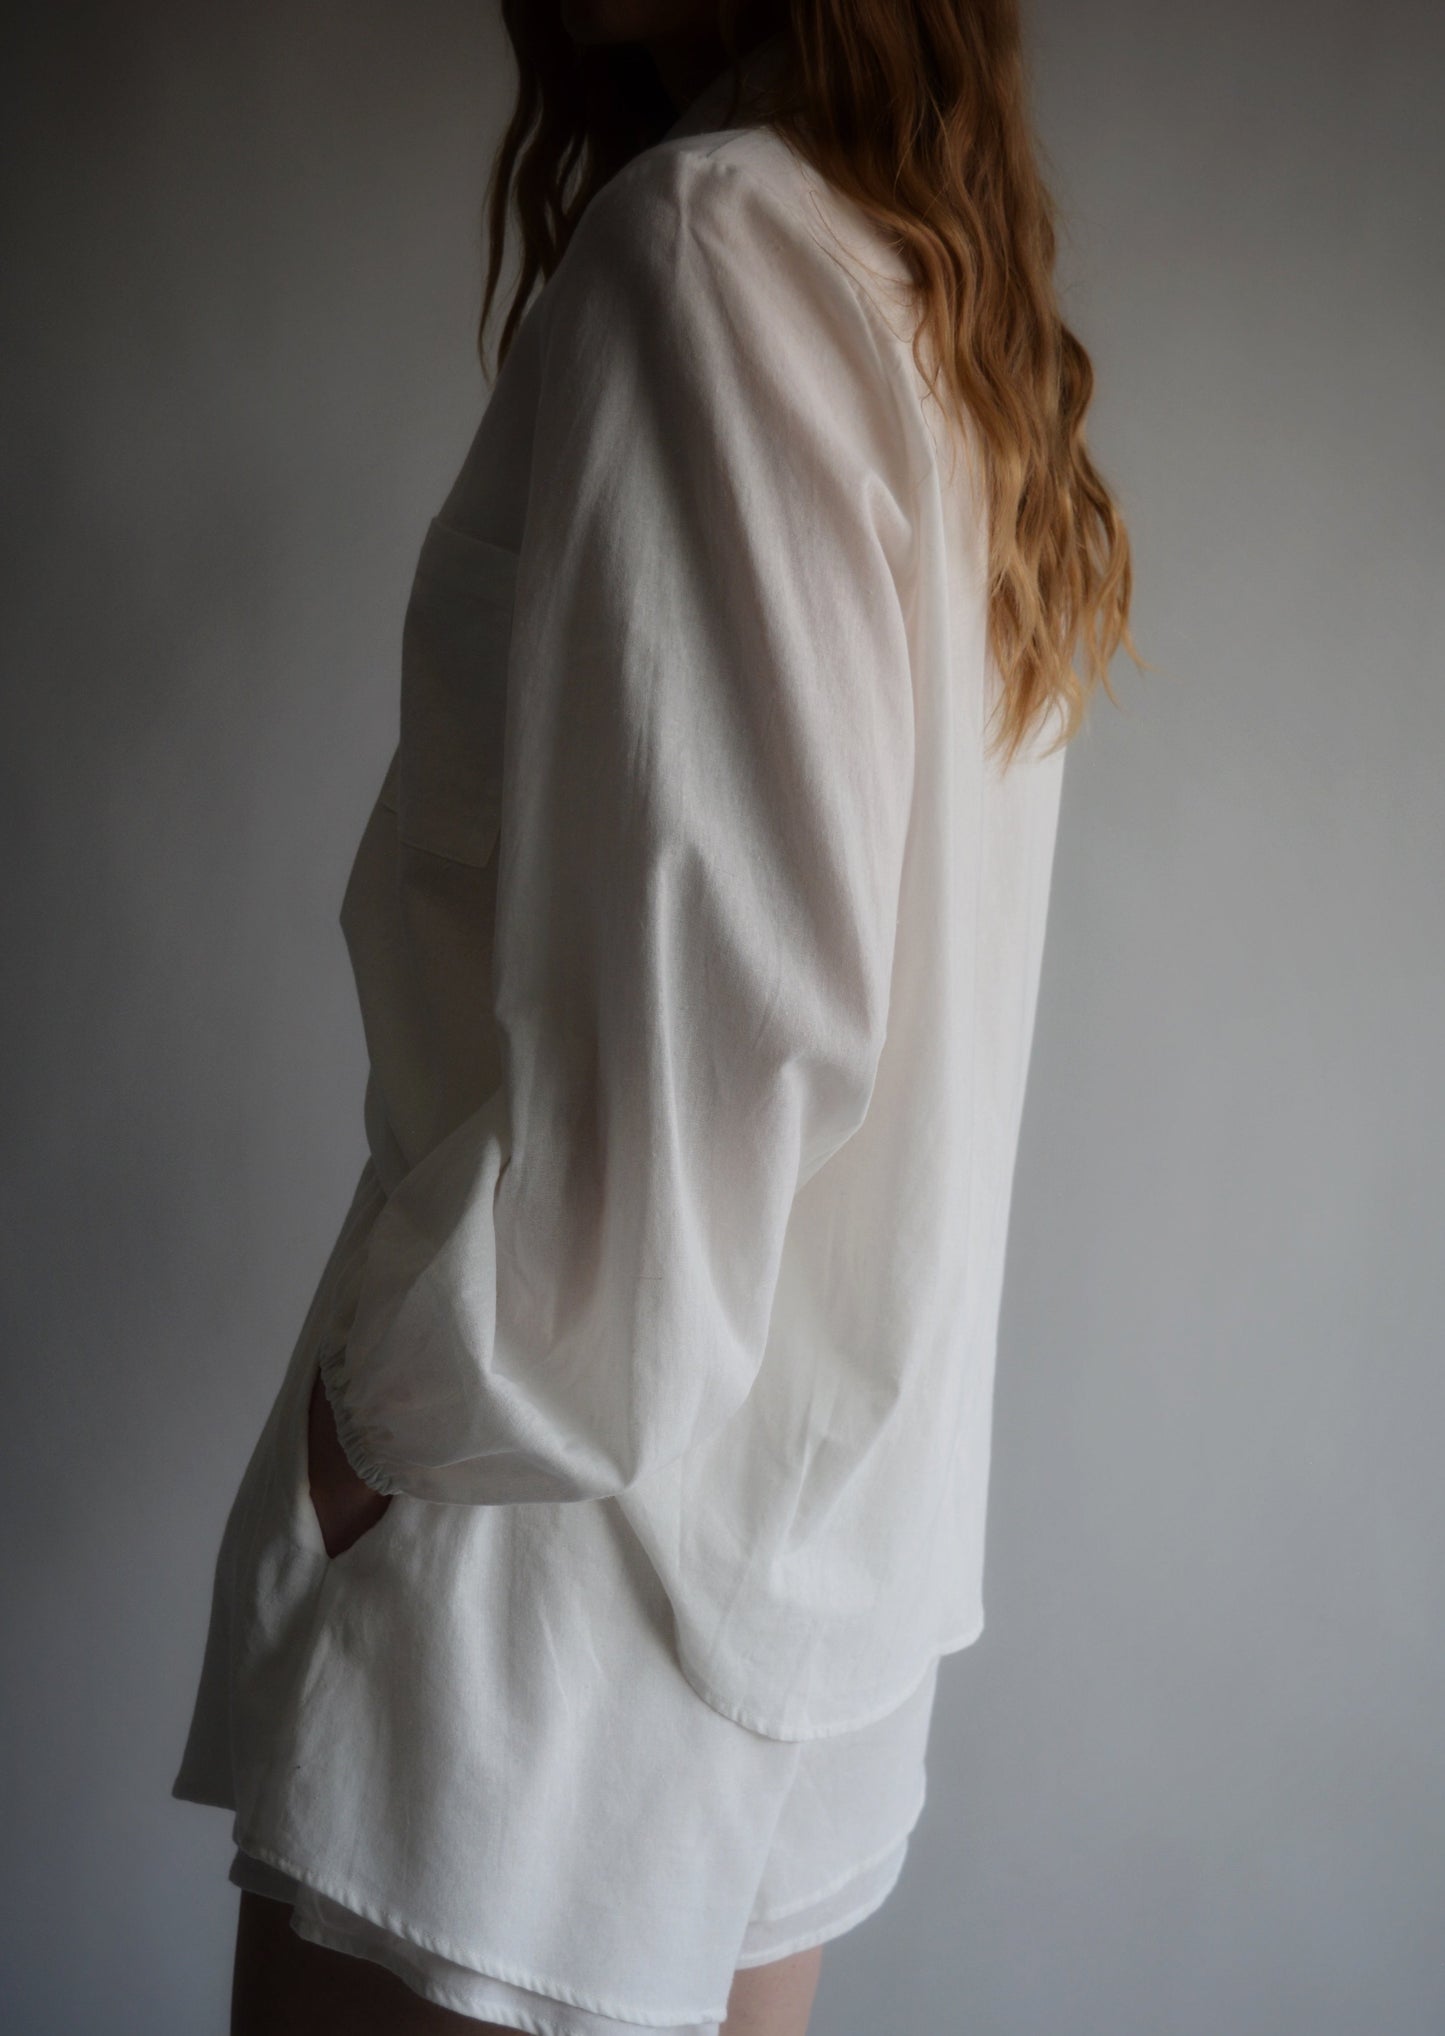 Cotton Blouse in White color